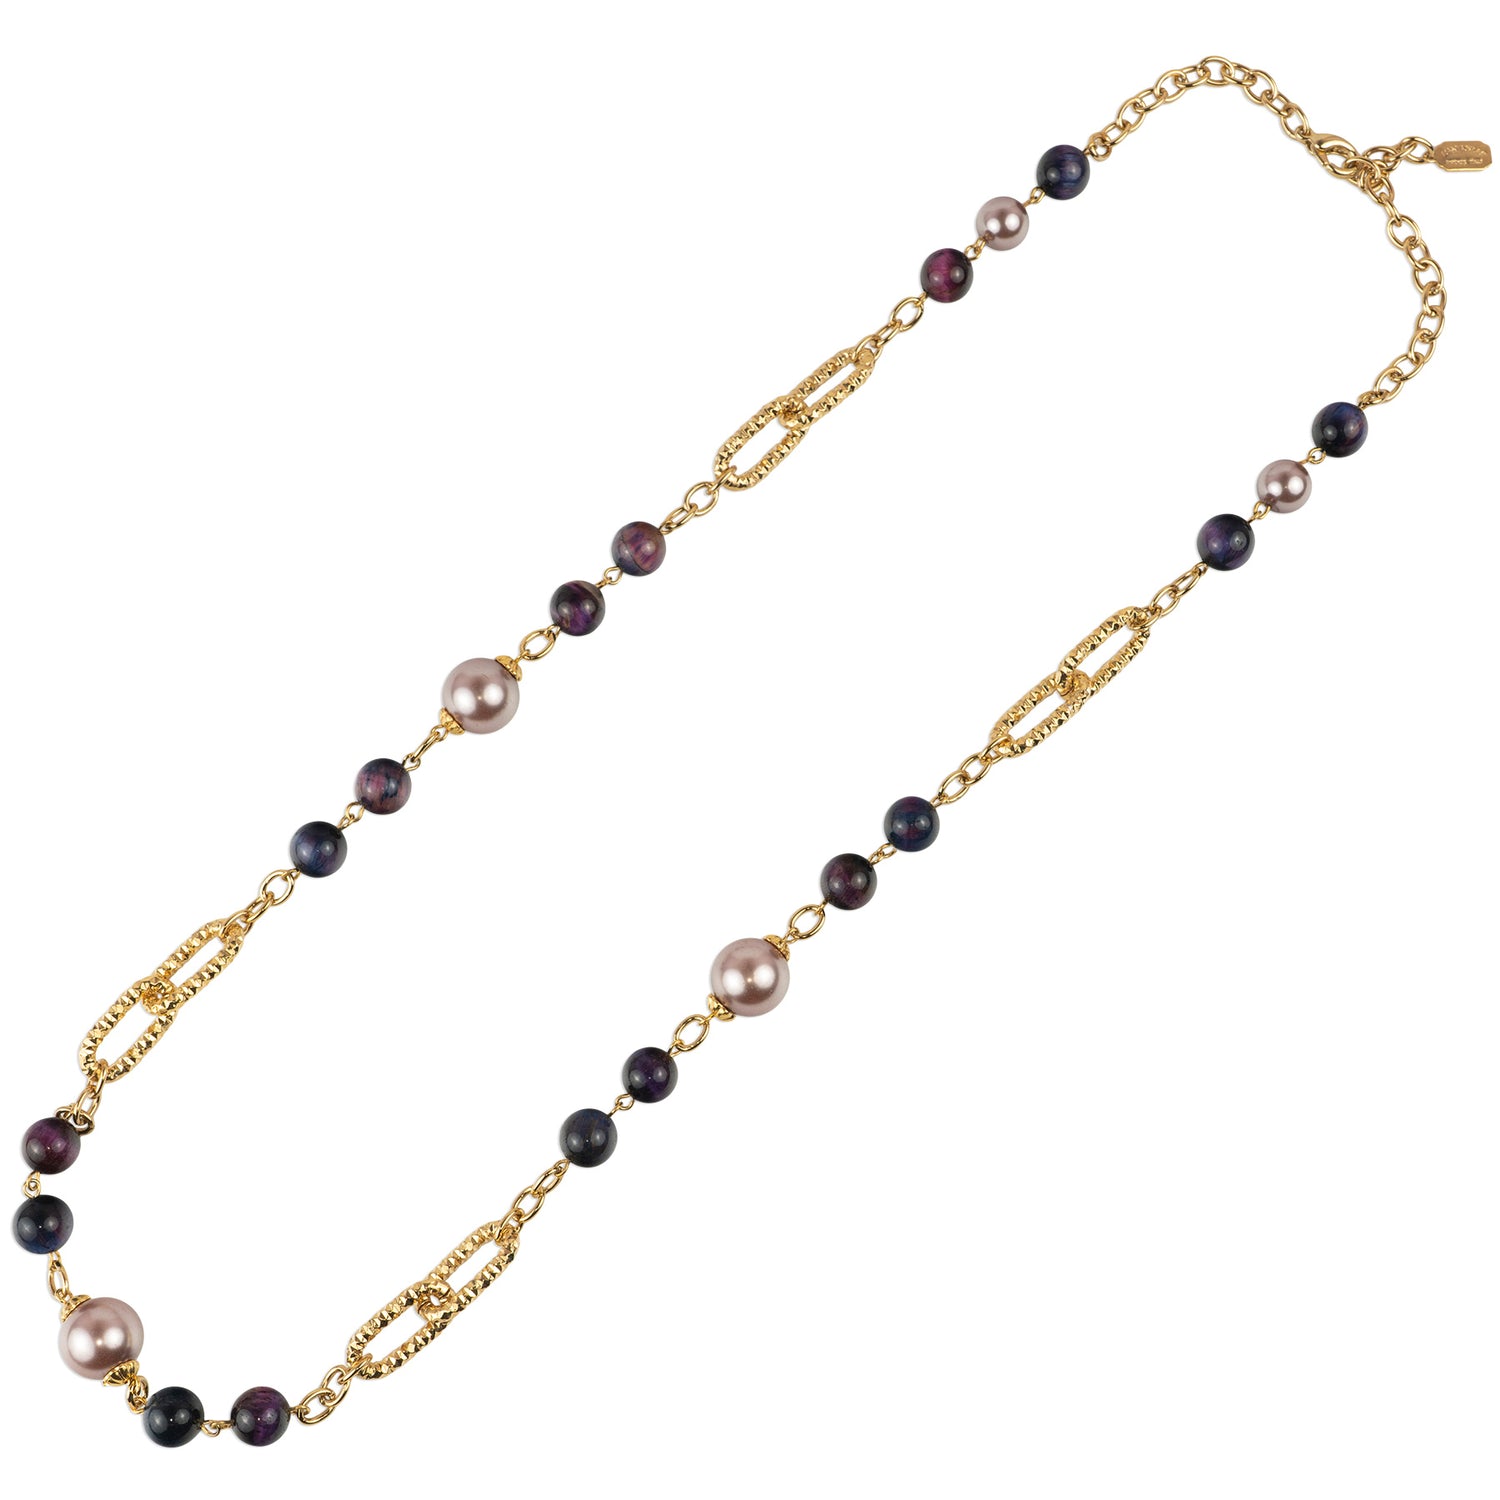 Long chain necklace with semiprecious stones and pearls